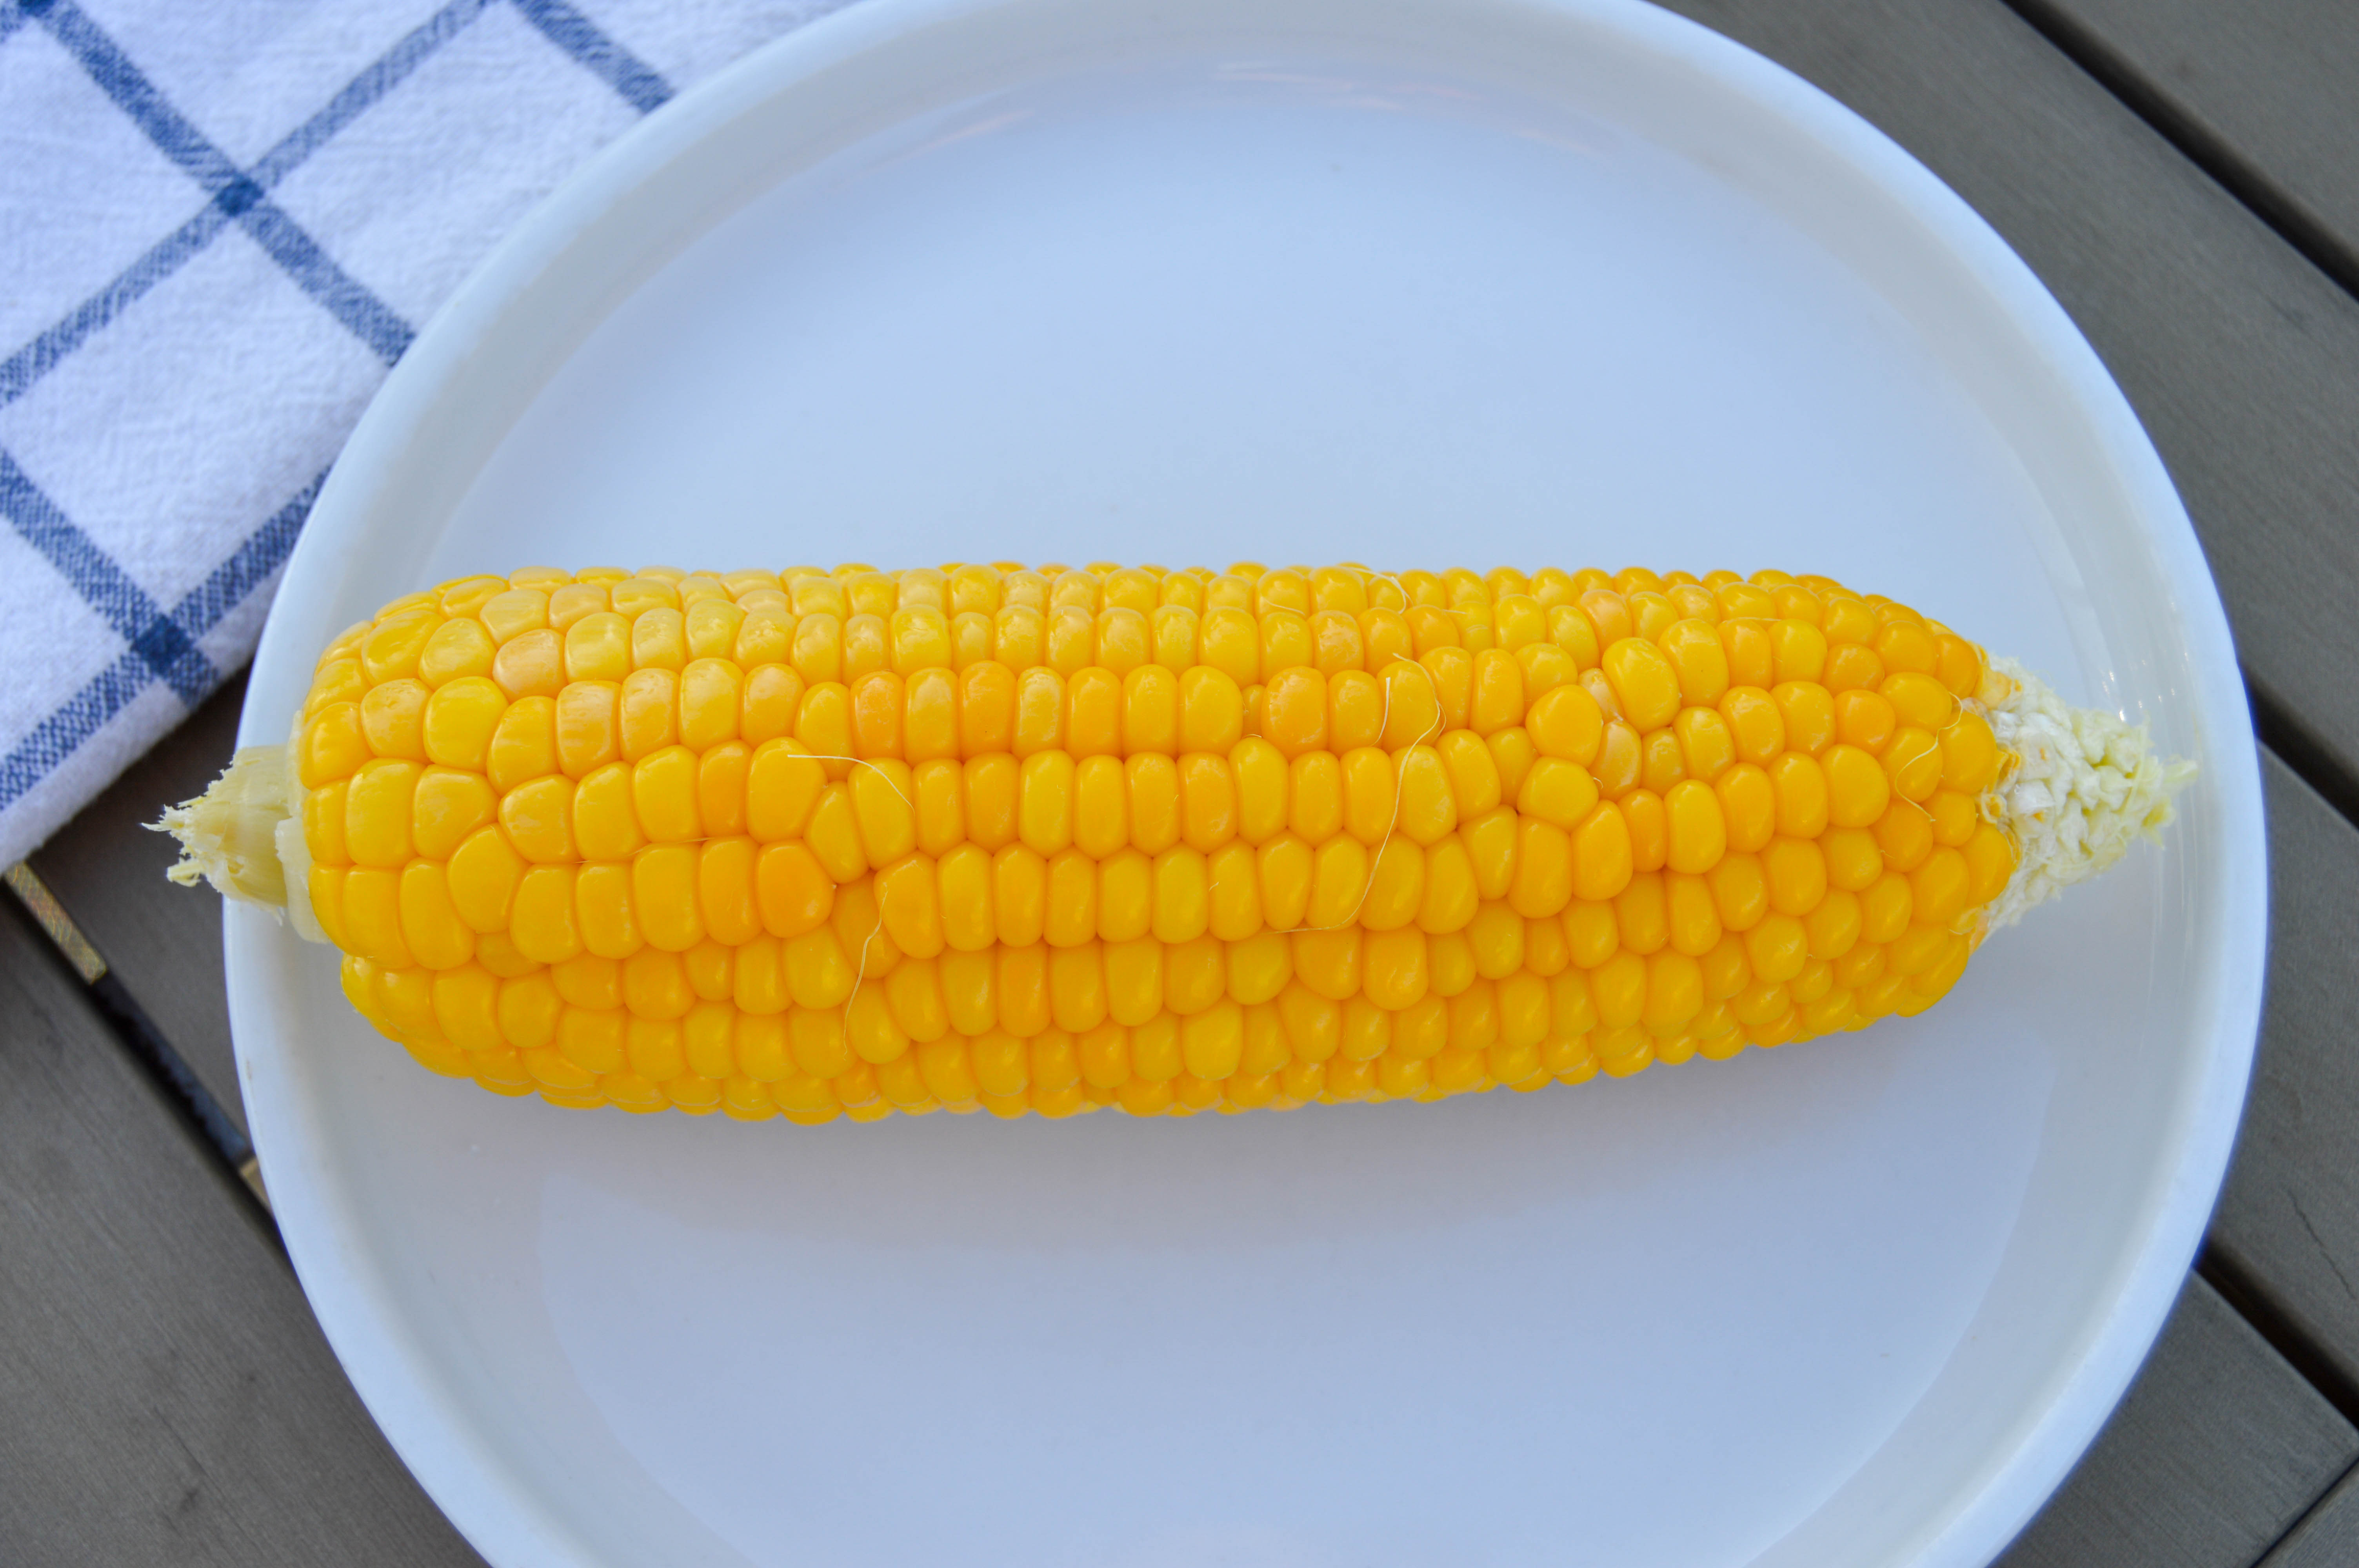 Looking or the perfect side for those grilled ribs? Keep it simple and cheap when you learn how to grill corn on the cob the easy way. With minimal prep or fuss, this simple grilled side dish makes outdoor entertaining a breeze. That farmers market corn has never tasted so good!